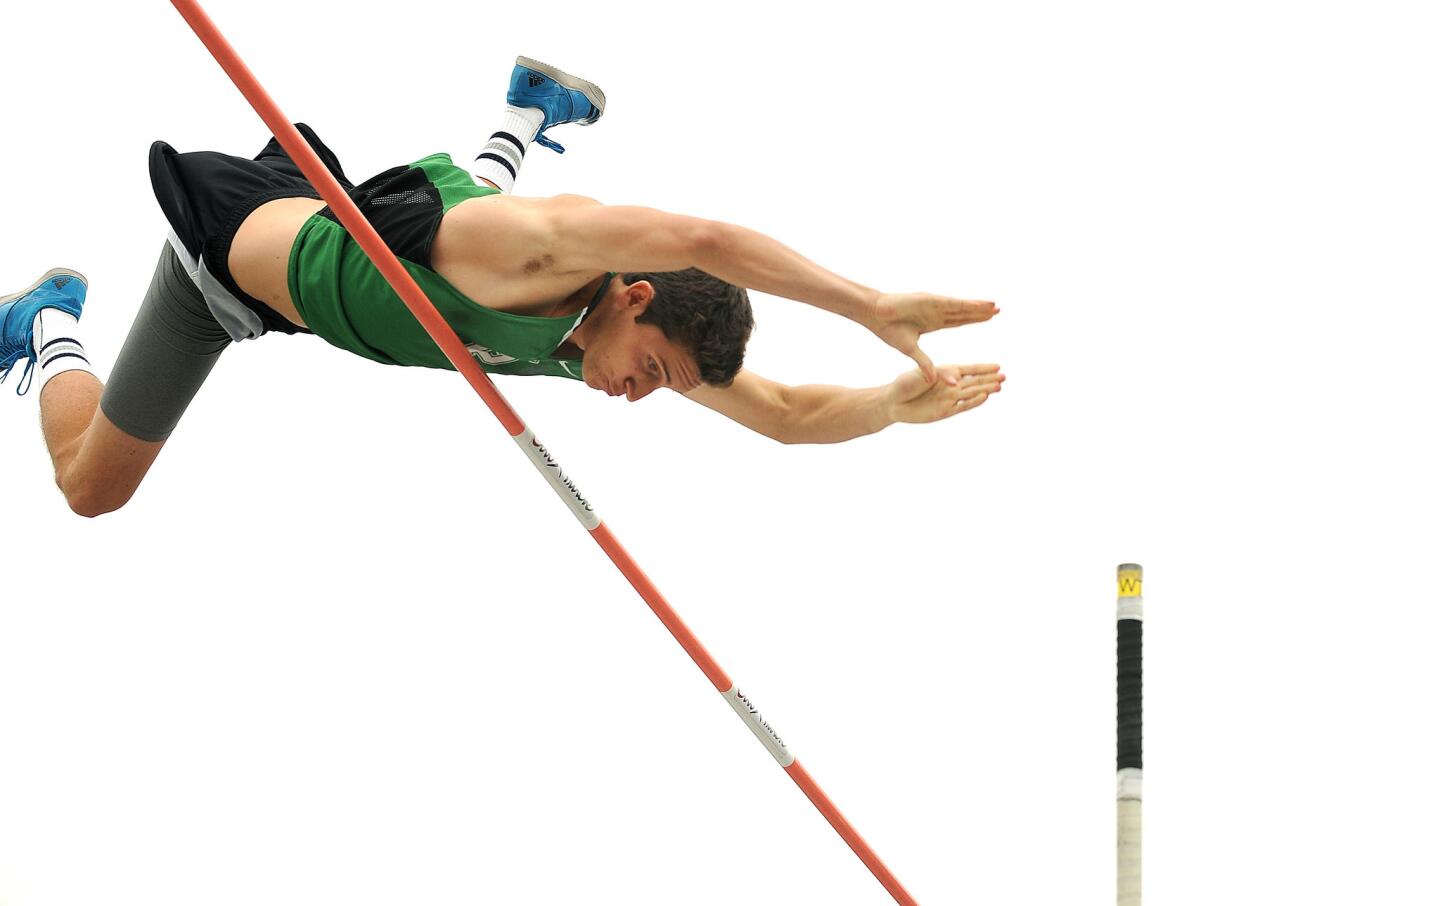 Thousand Oaks' Luigi Colella became the first high school athlete to clear 17 feet at Cerritos, setting a Division 2 record at 17-0 3/4.